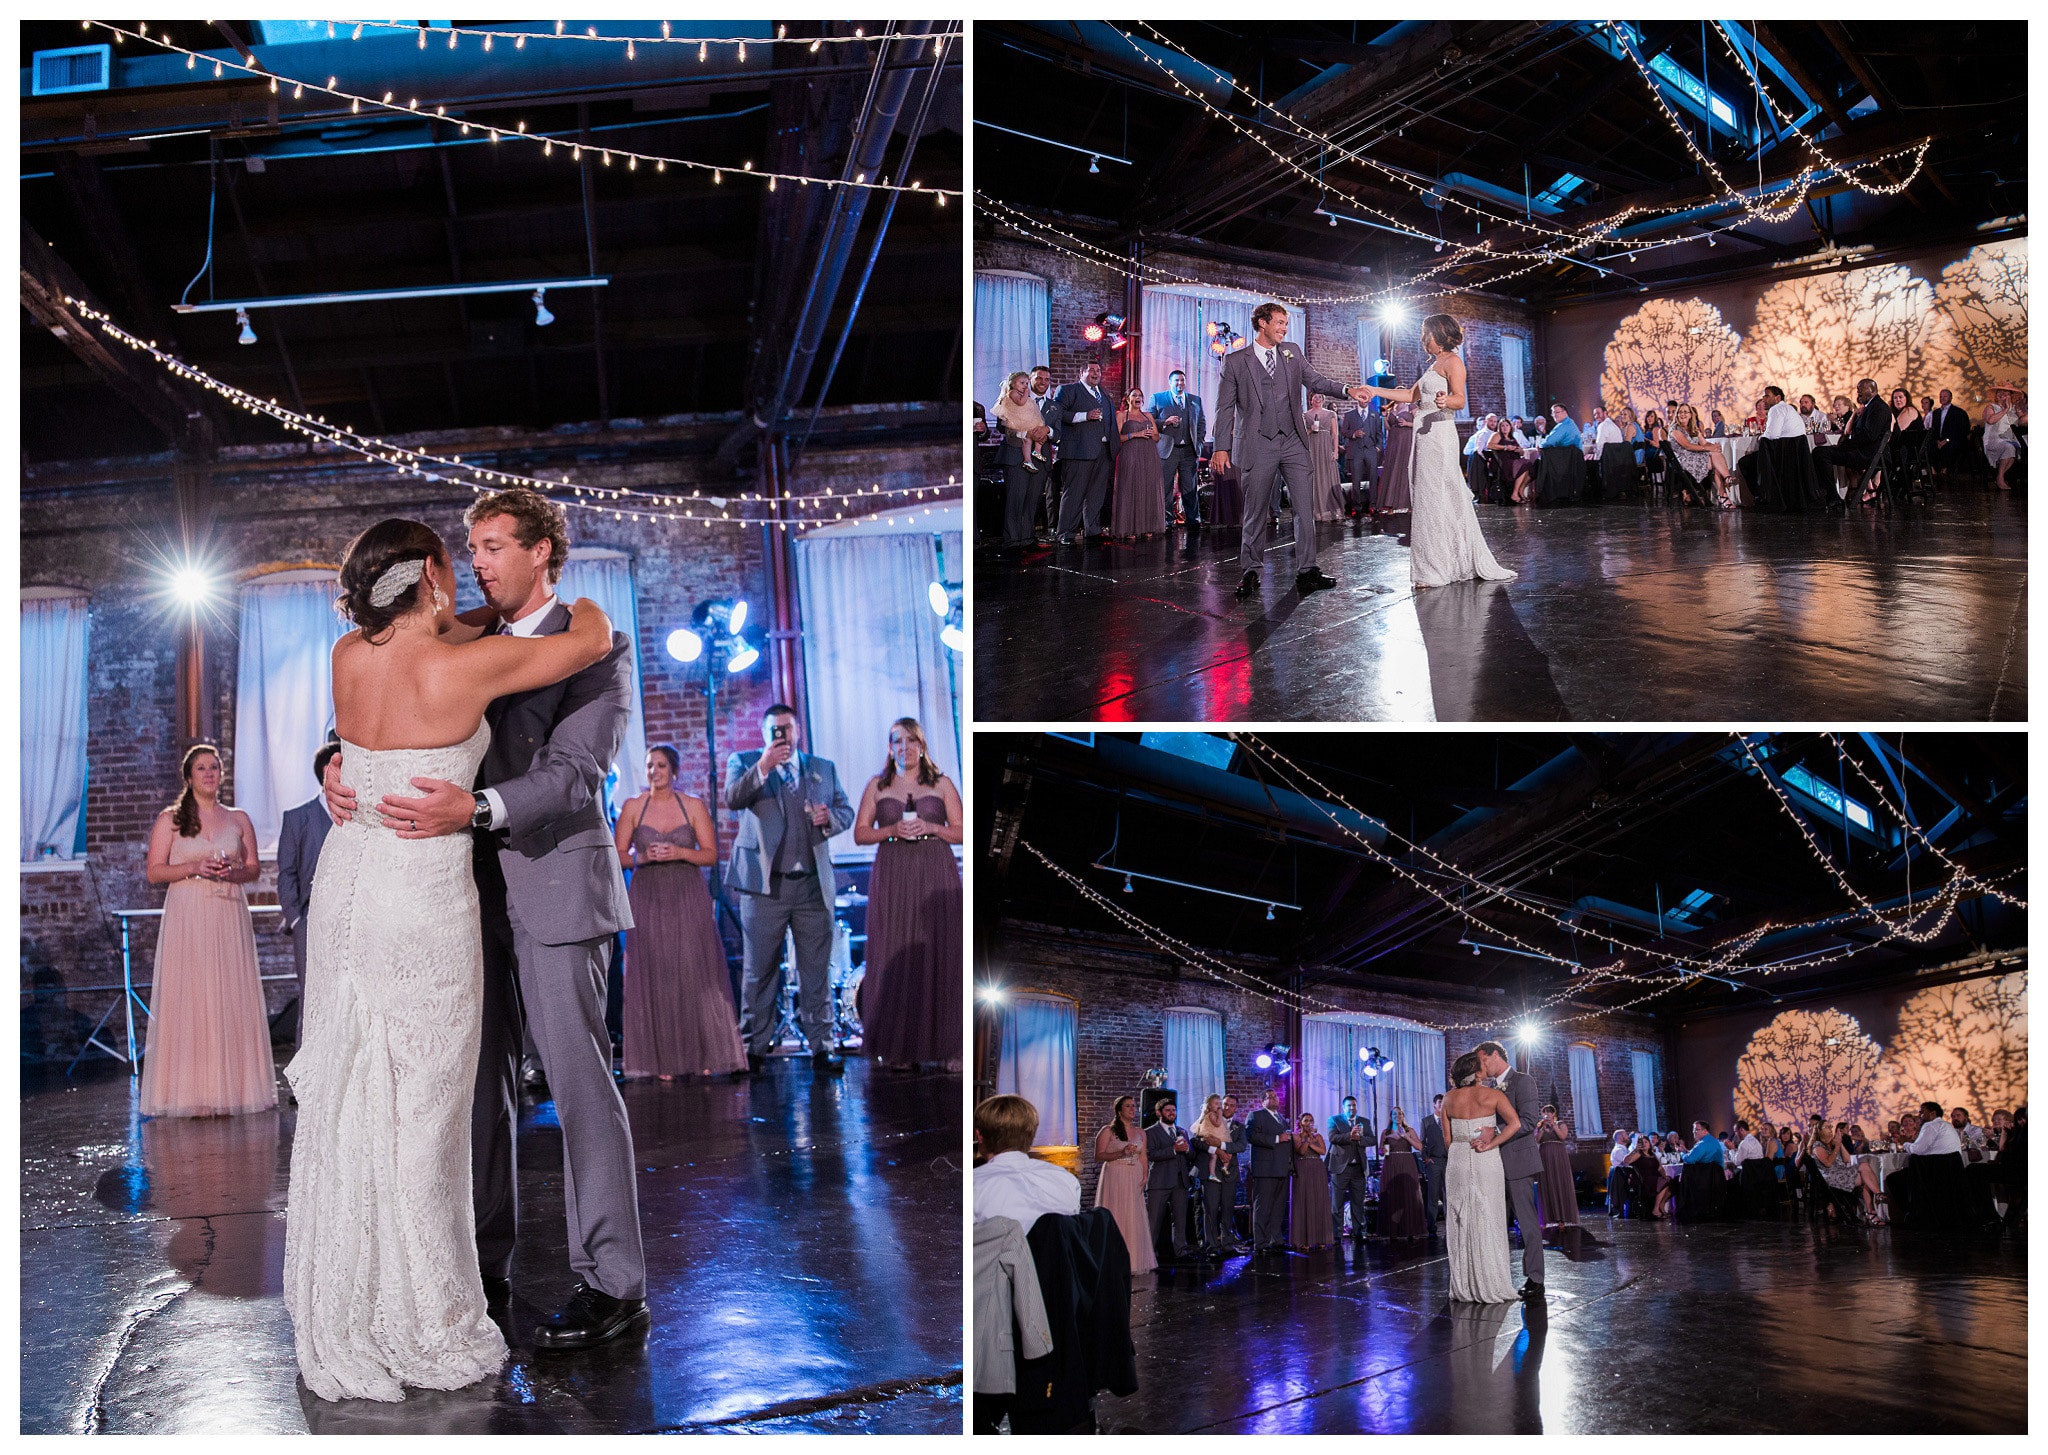 The First Dance, the couple dancing together - Music and Band – Seven Sharp Nine - Venue and Catering – King plow Event Gallery and Bold American Events Decor and flowers – Stylish Stems Music and Band – Seven Sharp Nine Transportation – Georgia Trolley Photographer One Life Photography